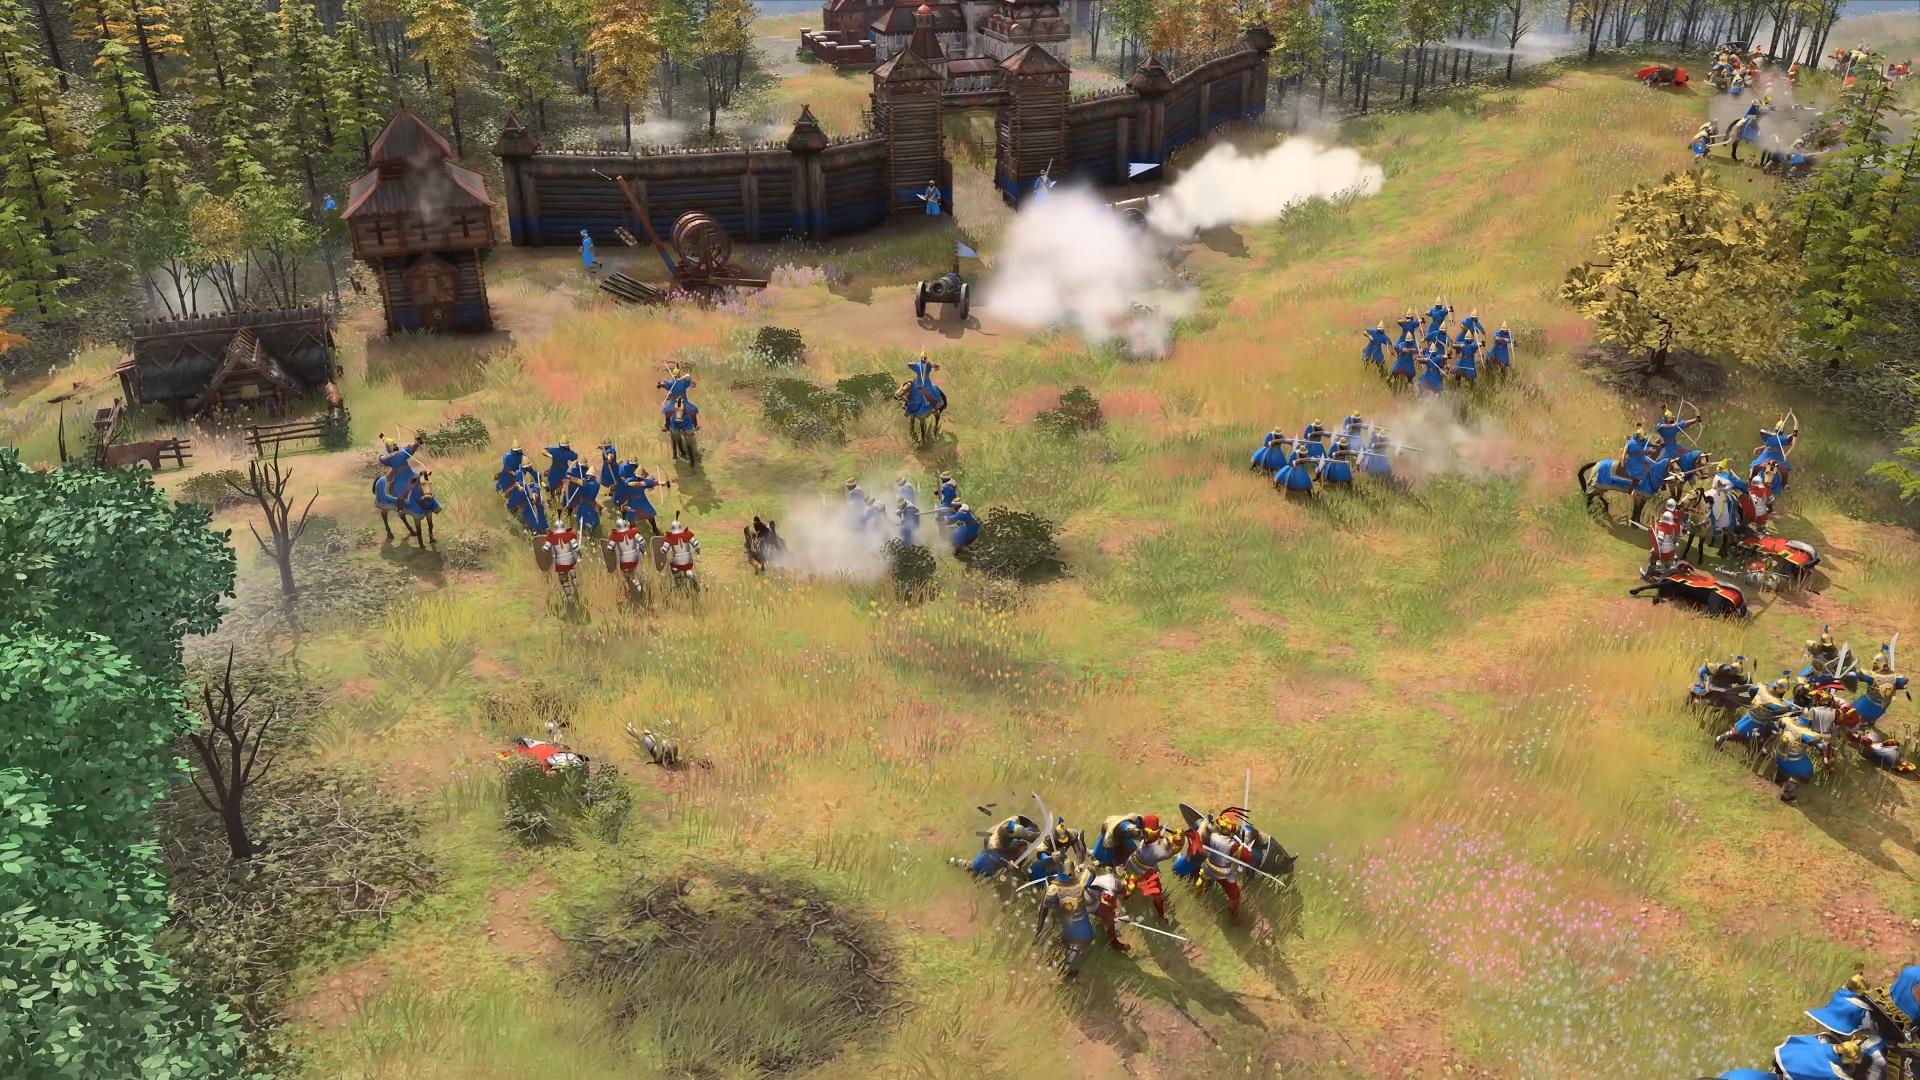 Age of Empires 4 Season 2 update lets you rotate the camera